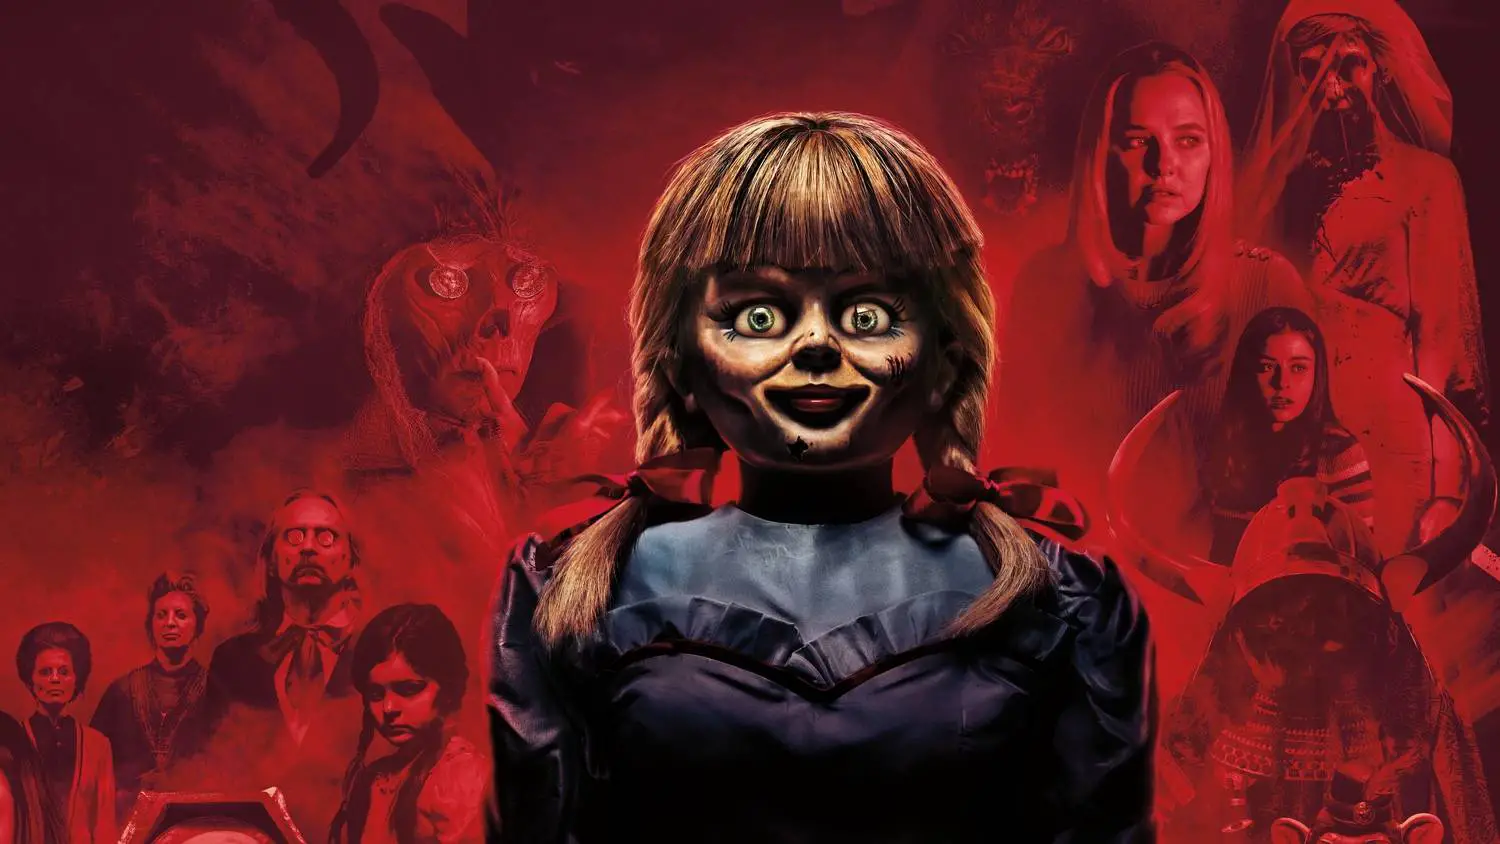 Annabelle comes home horror film review cover